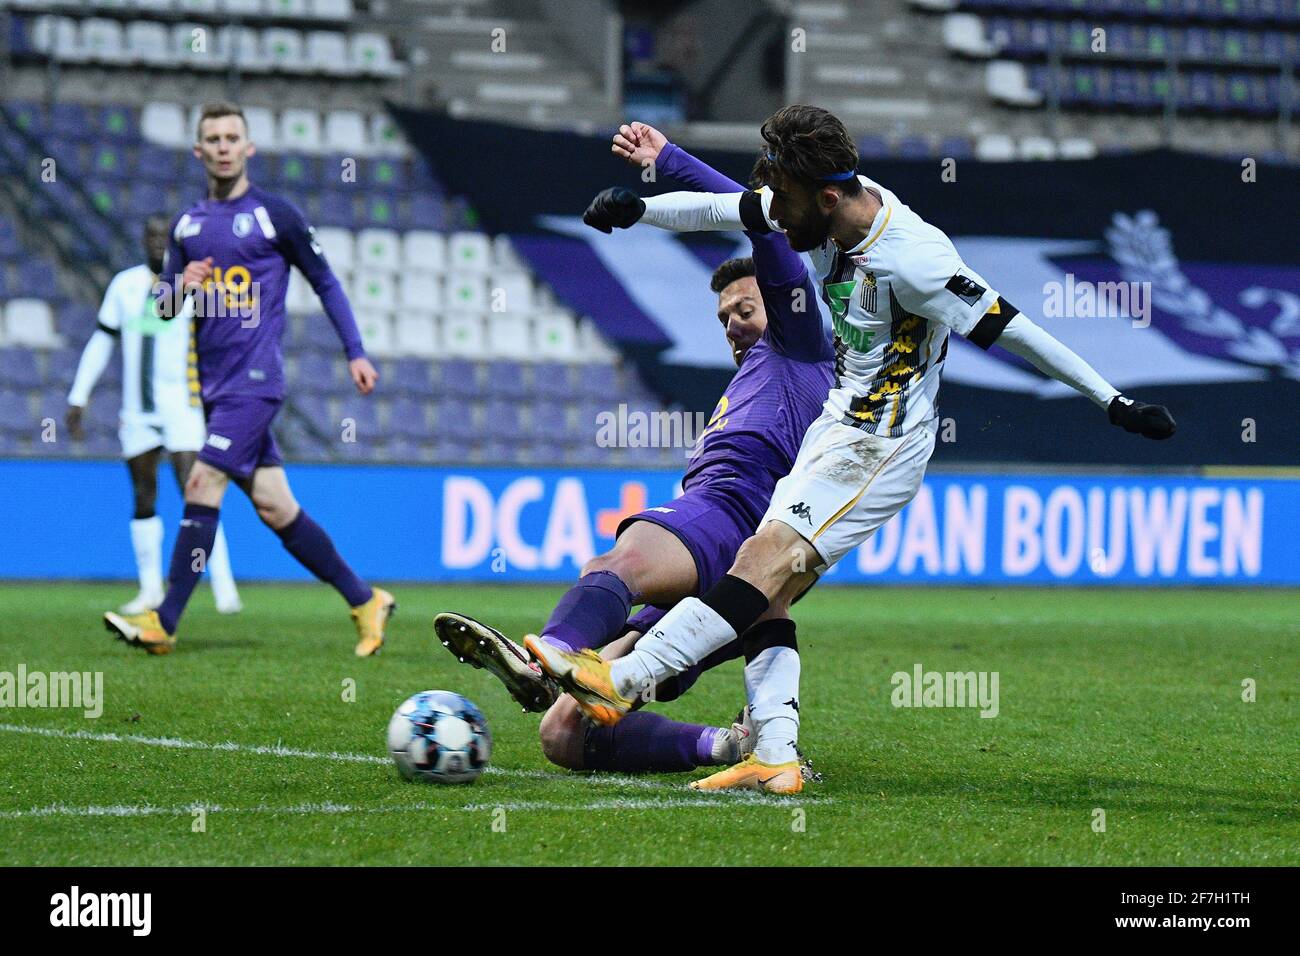 Beerschot's Stipe Radic and Charleroi's Ali Gholizadeh fight for the ball during a postponed soccer match between Beerschot VA and Sporting Charleroi, Stock Photo